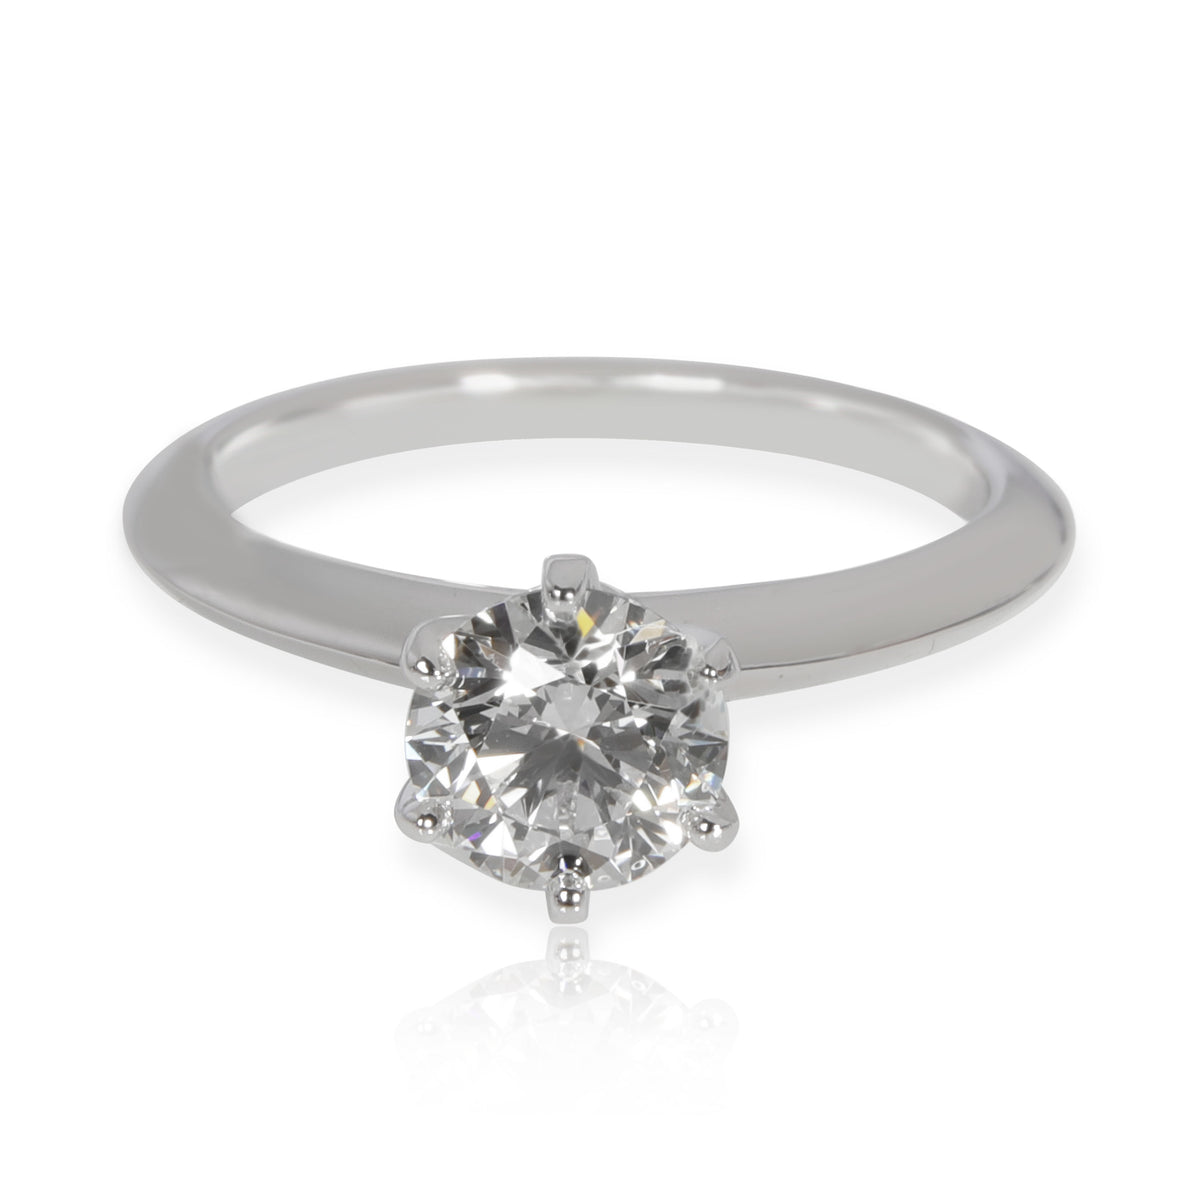 Tiffany & Co. Solitaire Diamond Engagement Ring in Platinum (G VS2 1.00 ct)